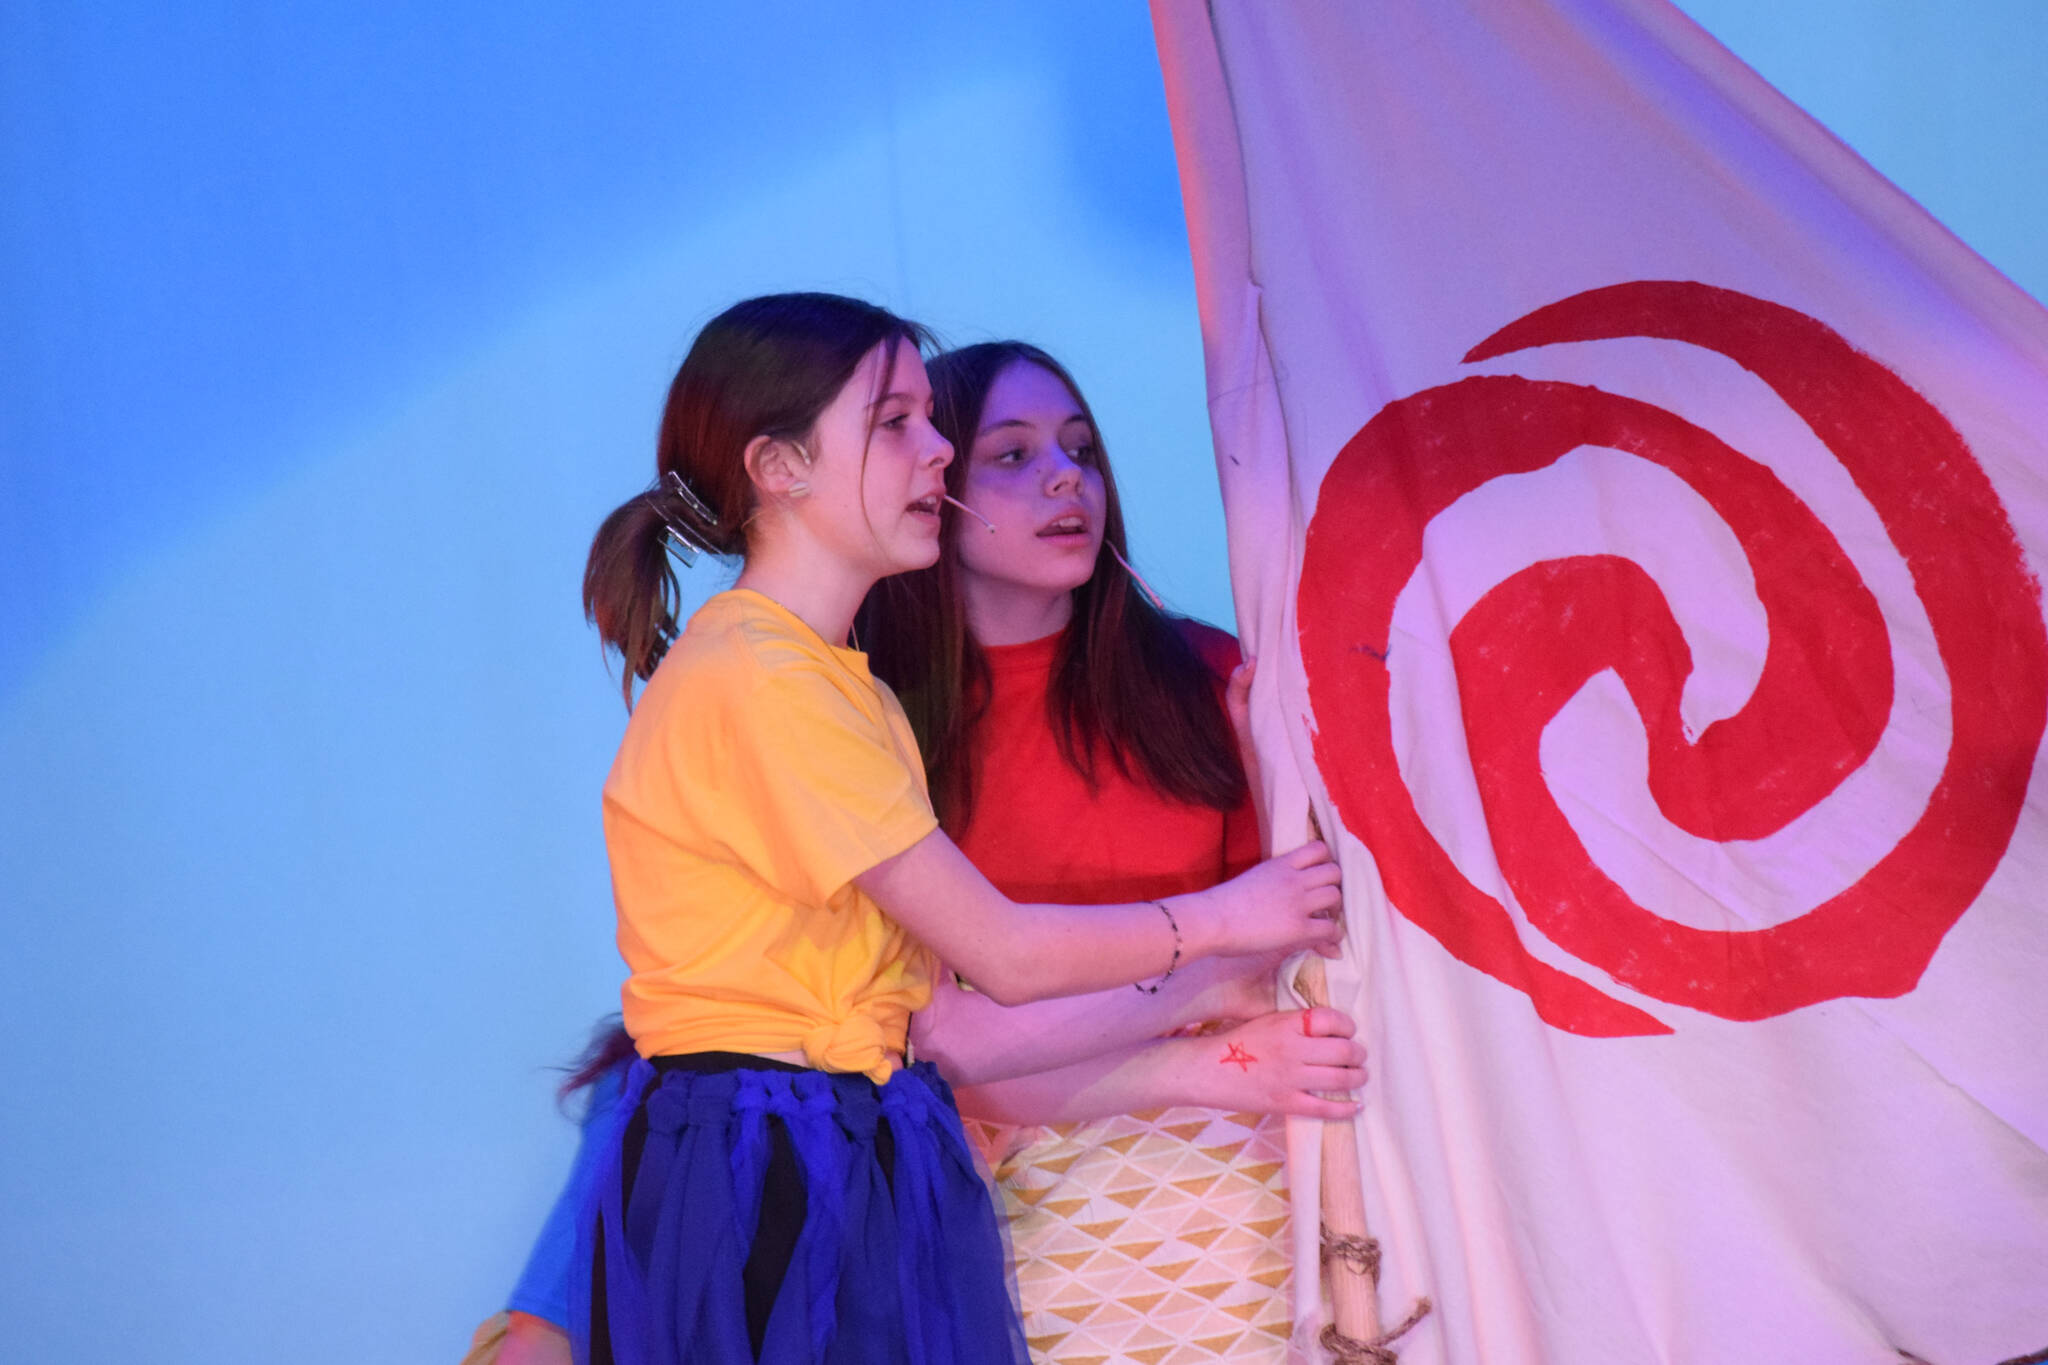 Aislyn Downum, left, and Mylee Yeoman perform a scene from “Moana” during a dress rehearsal at the Renee C. Henderson Auditorium in Kenai, Alaska, on Wednesday, April 27, 2022. (Camille Botello/Peninsula Clarion)